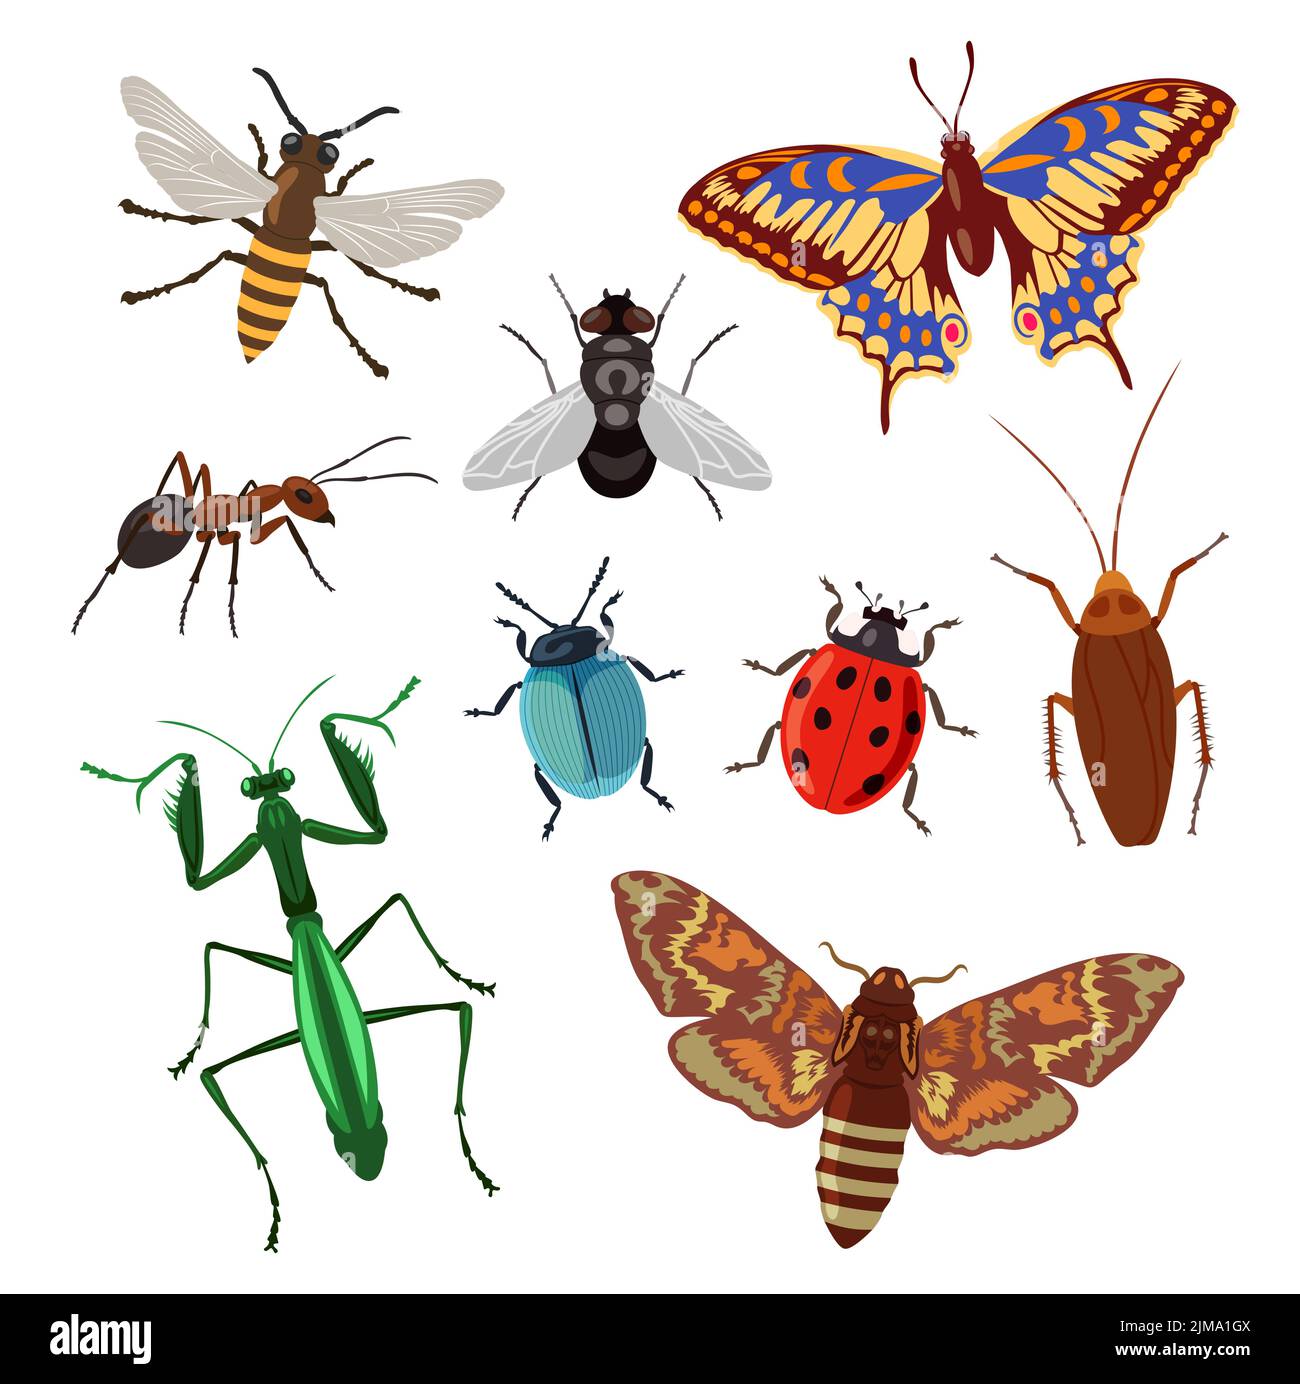 Realistic insects on white background cartoon illustration set. Lady bug, beetle, grub, cockroach, roach, ant, butterfly, bee and grasshopper. Agricul Stock Vector